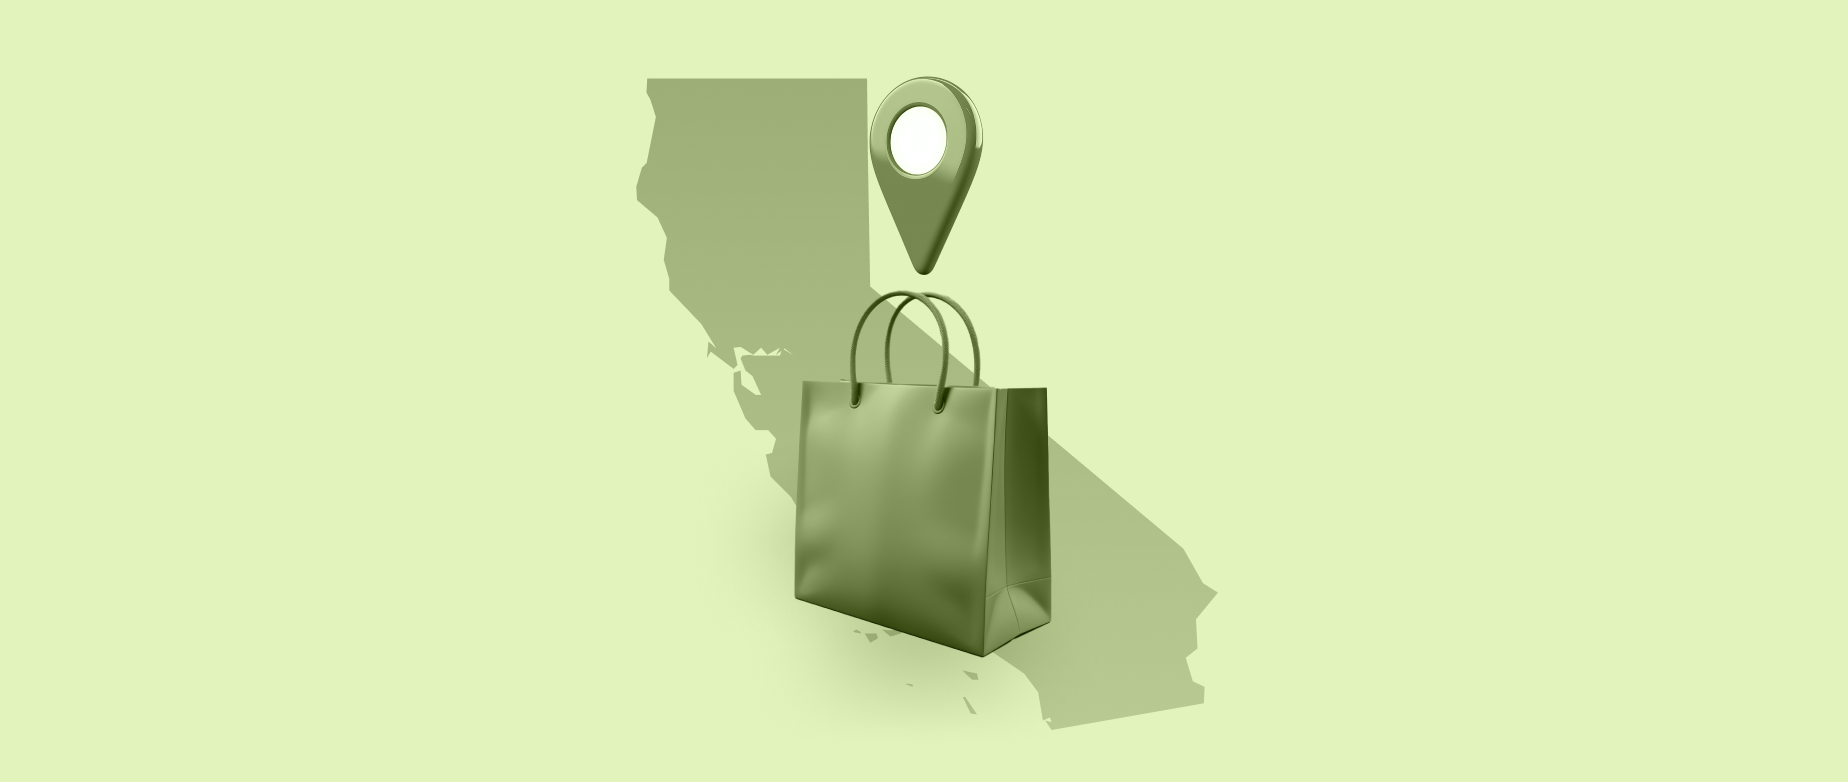 Green outline of state of California with shopping bag and location icon on light green background.